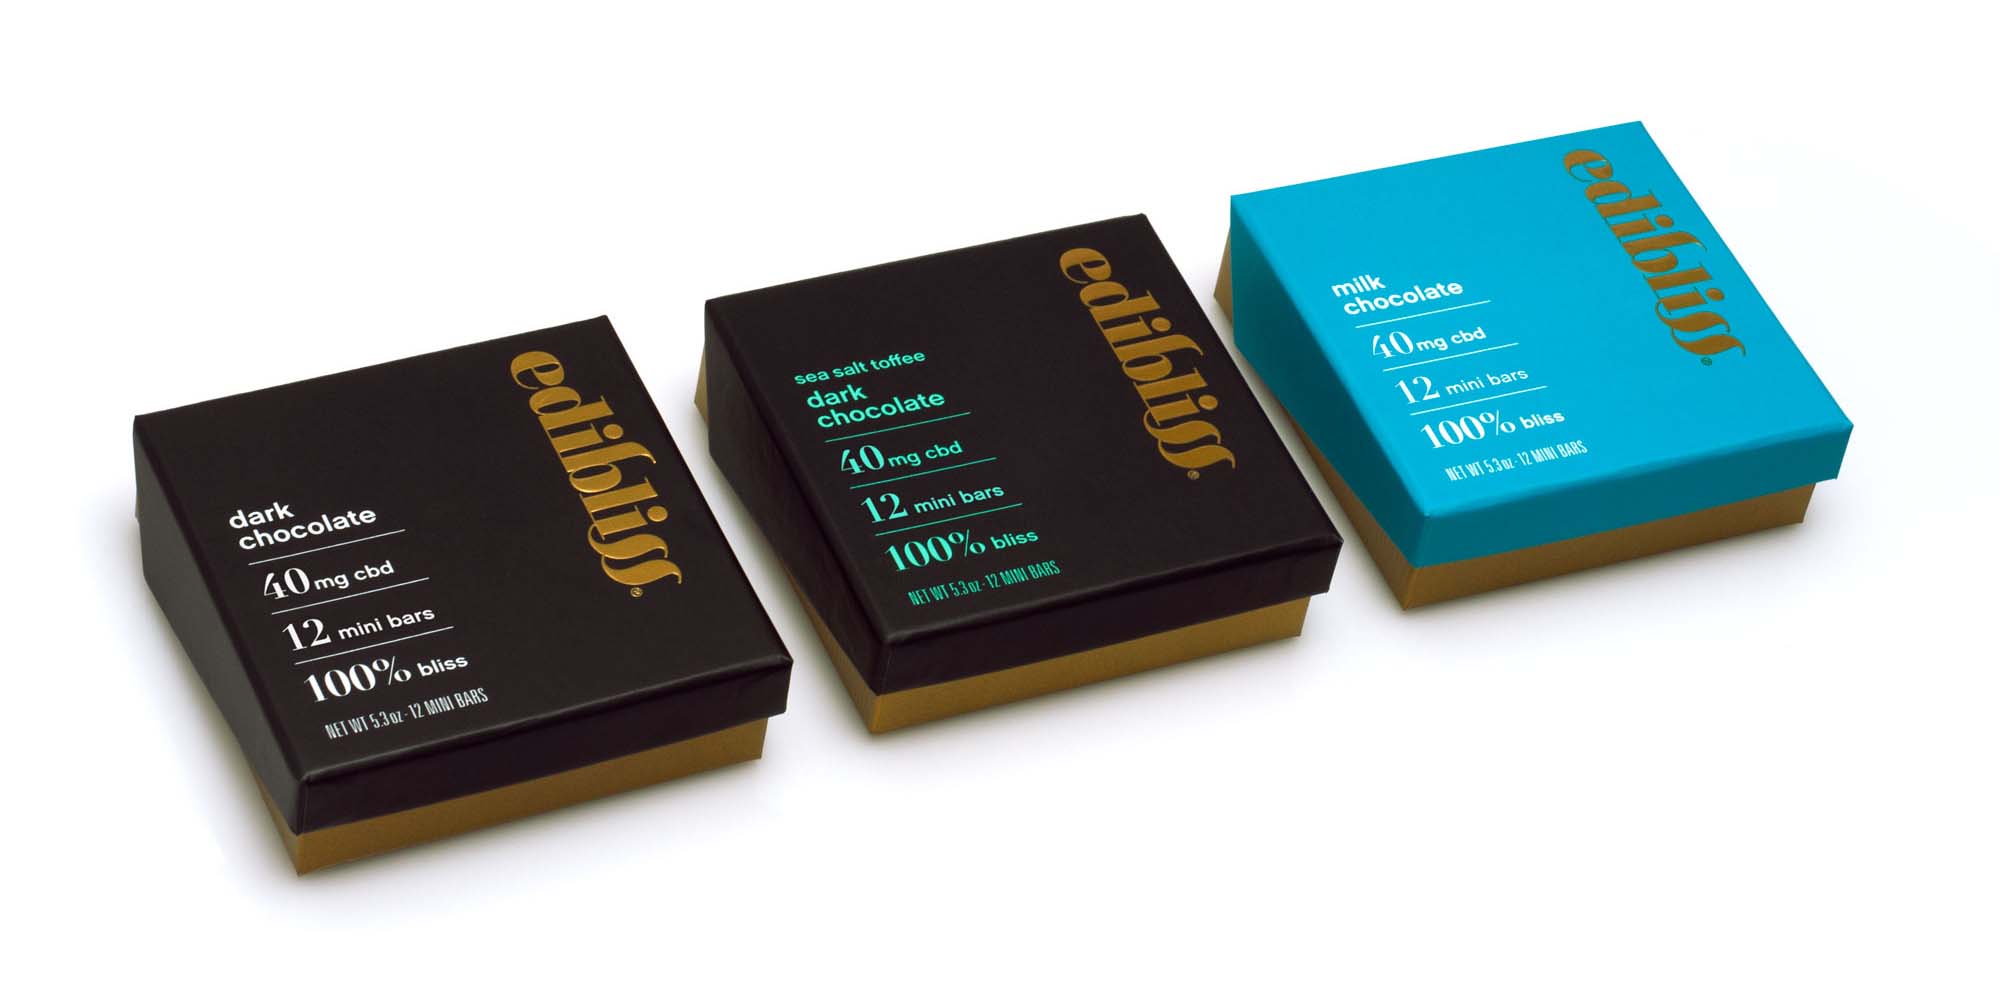 the Edibliss CBD chocolate packaging is artisanal and sophisticated in design, utilizing a rich color palette paired with gold foil treatments to clearly communicate exceptional quality, flavor variations and wellness benefits.